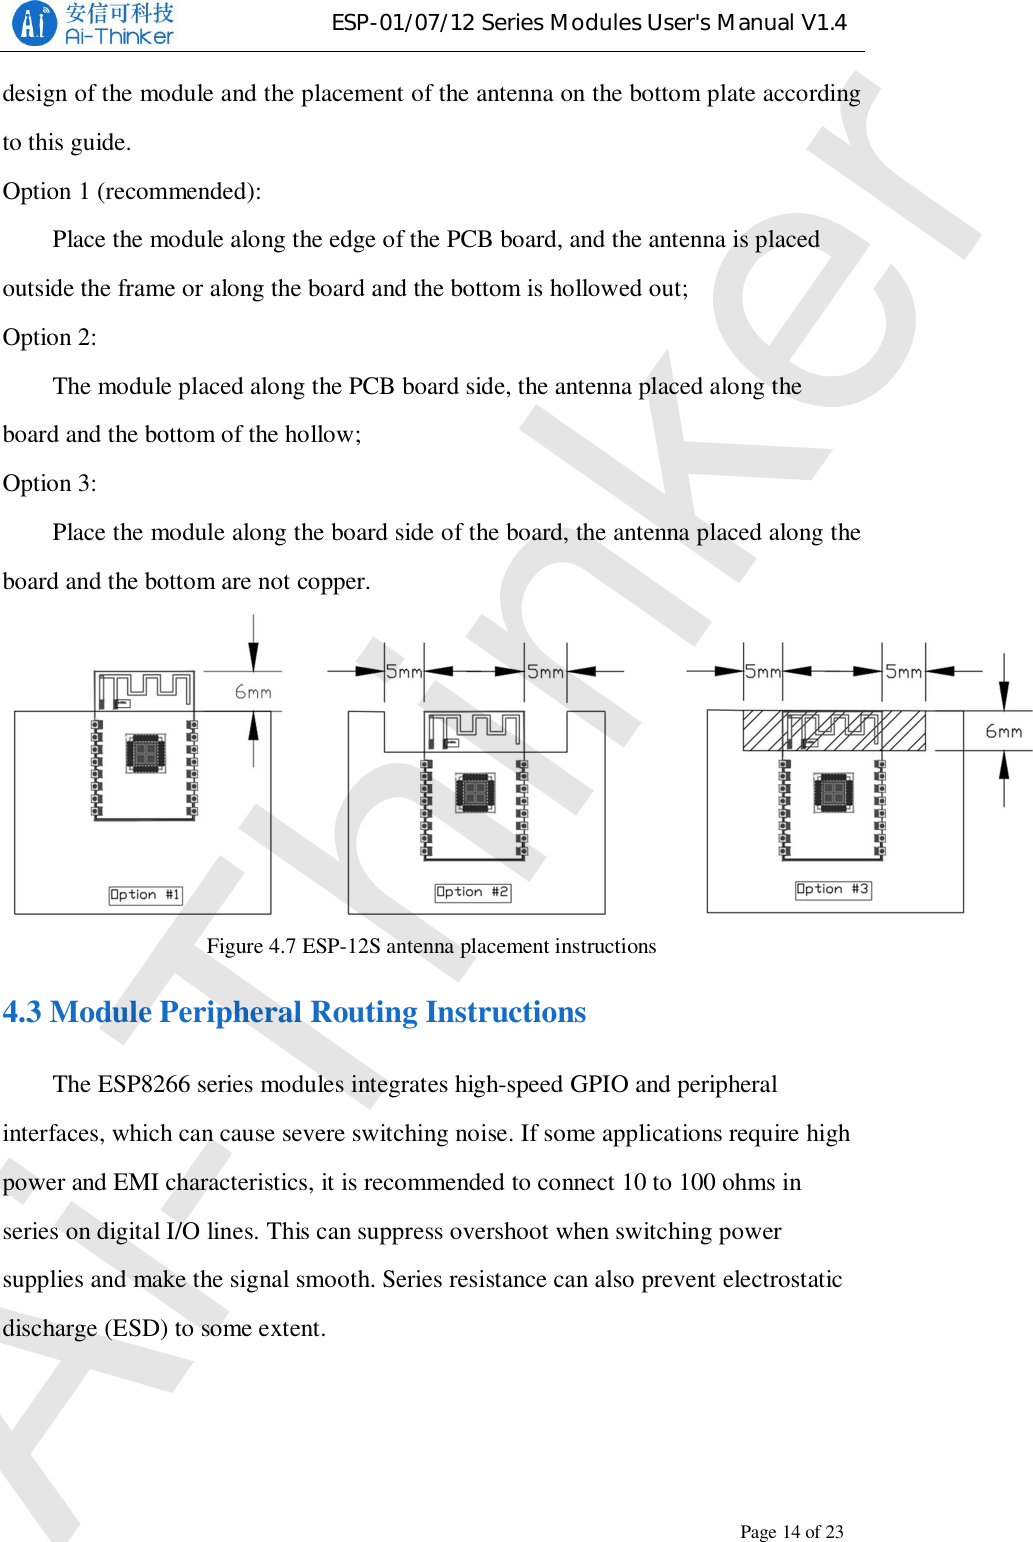 ESP-01/07/12 Series Modules User&apos;s Manual V1.4Copyright © 2017 Shenzhen Ai-Thinker Technology Co., Ltd All Rights ReservedPage14of23design of the module and the placement of the antenna on the bottom plate accordingto this guide.Option 1 (recommended):Place the module along the edge of the PCB board, and the antenna is placedoutside the frame or along the board and the bottom is hollowed out;Option 2:The module placed along the PCB board side, the antenna placed along theboard and the bottom of the hollow;Option 3:Place the module along the board side of the board, the antenna placed along theboard and the bottom are not copper.Figure 4.7 ESP-12S antenna placement instructions4.3 Module Peripheral Routing InstructionsThe ESP8266 series modules integrates high-speed GPIO and peripheralinterfaces, which can cause severe switching noise. If some applications require highpower and EMI characteristics, it is recommended to connect 10 to 100 ohms inseries on digital I/O lines. This can suppress overshoot when switching powersupplies and make the signal smooth. Series resistance can also prevent electrostaticdischarge (ESD) to some extent.Ai-Thinker